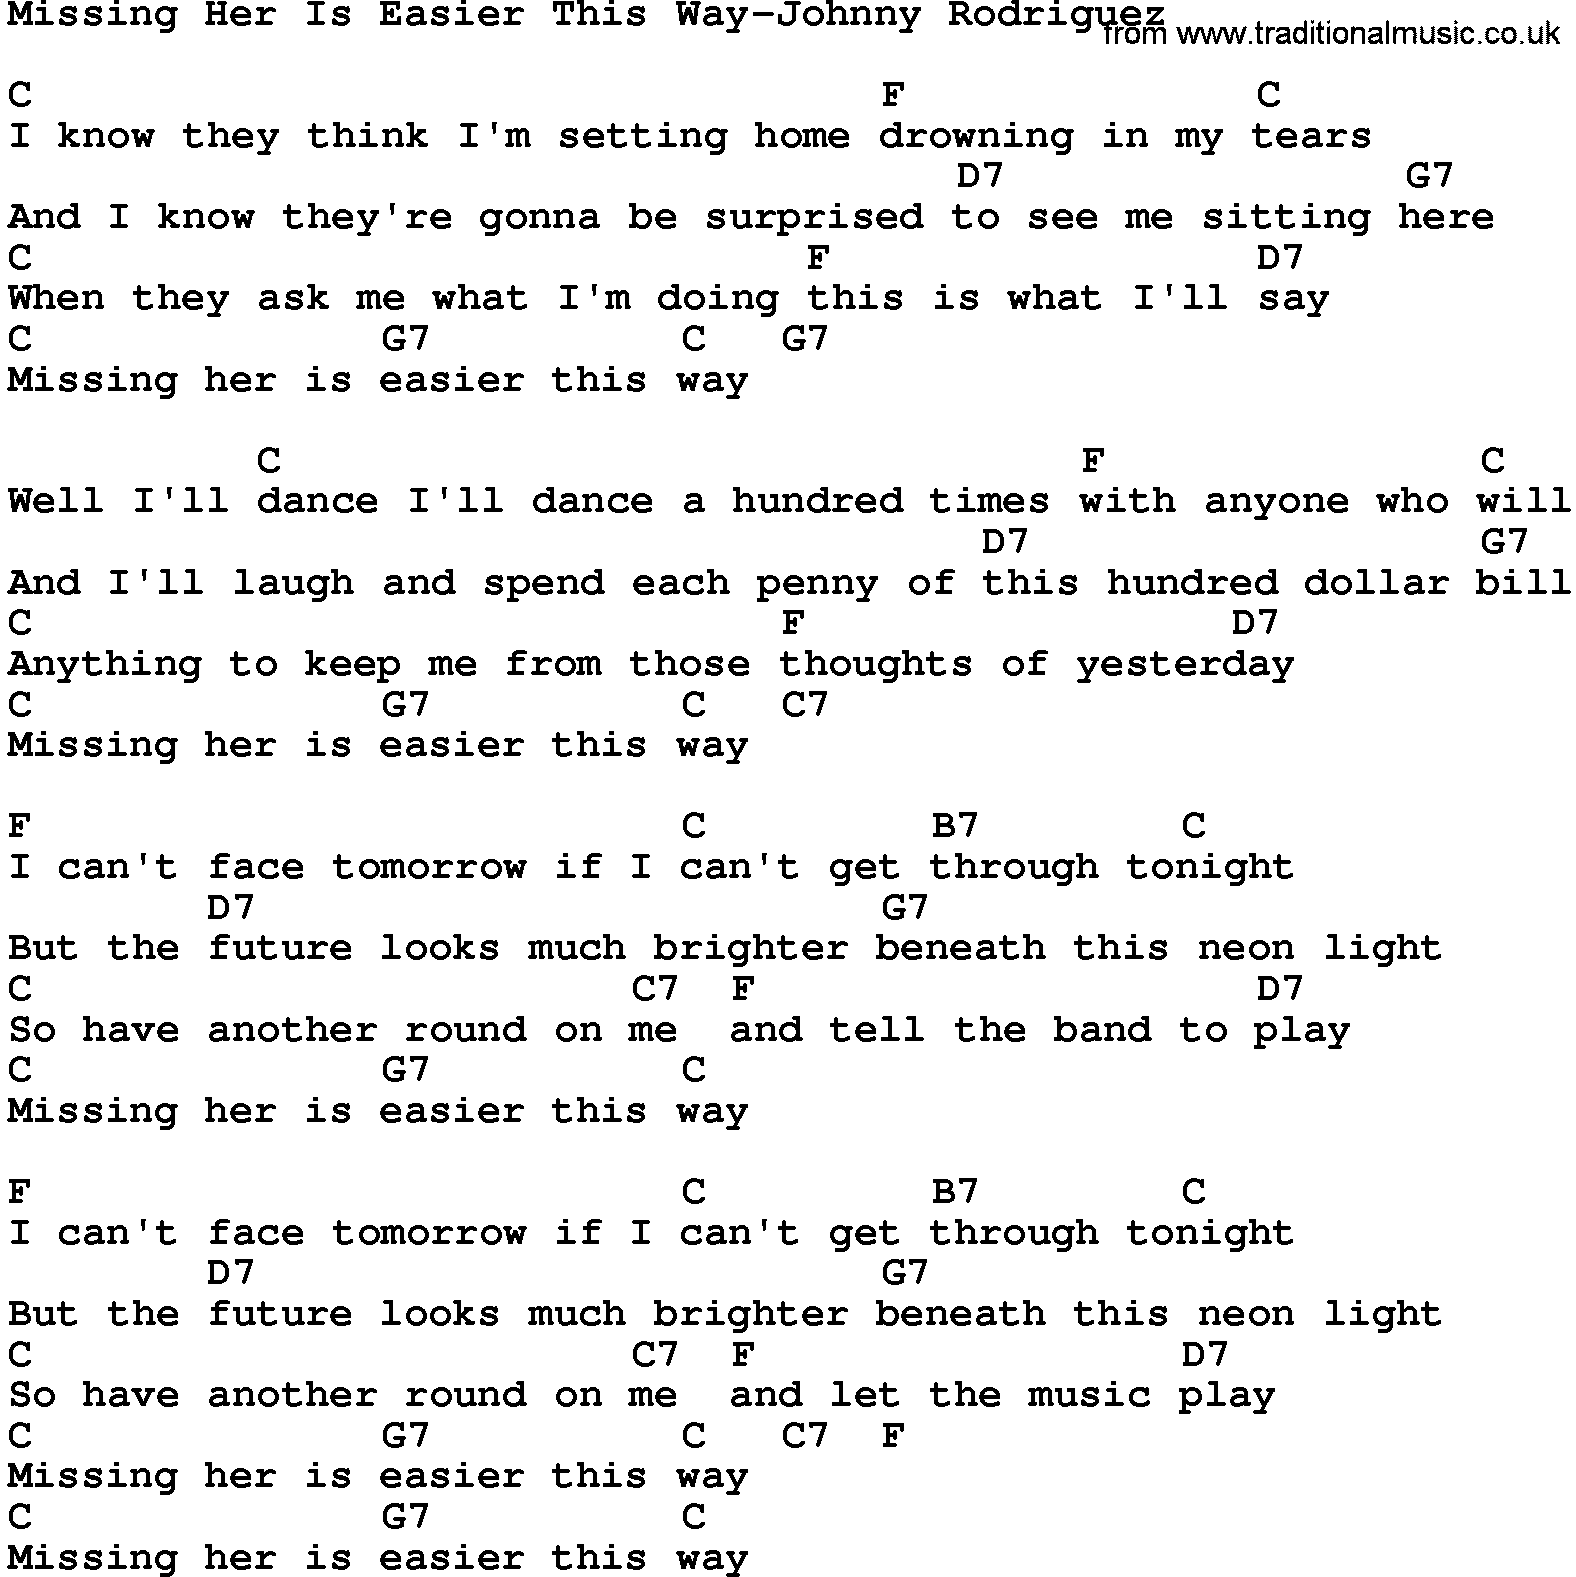 Country music song: Missing Her Is Easier This Way-Johnny Rodriguez lyrics and chords